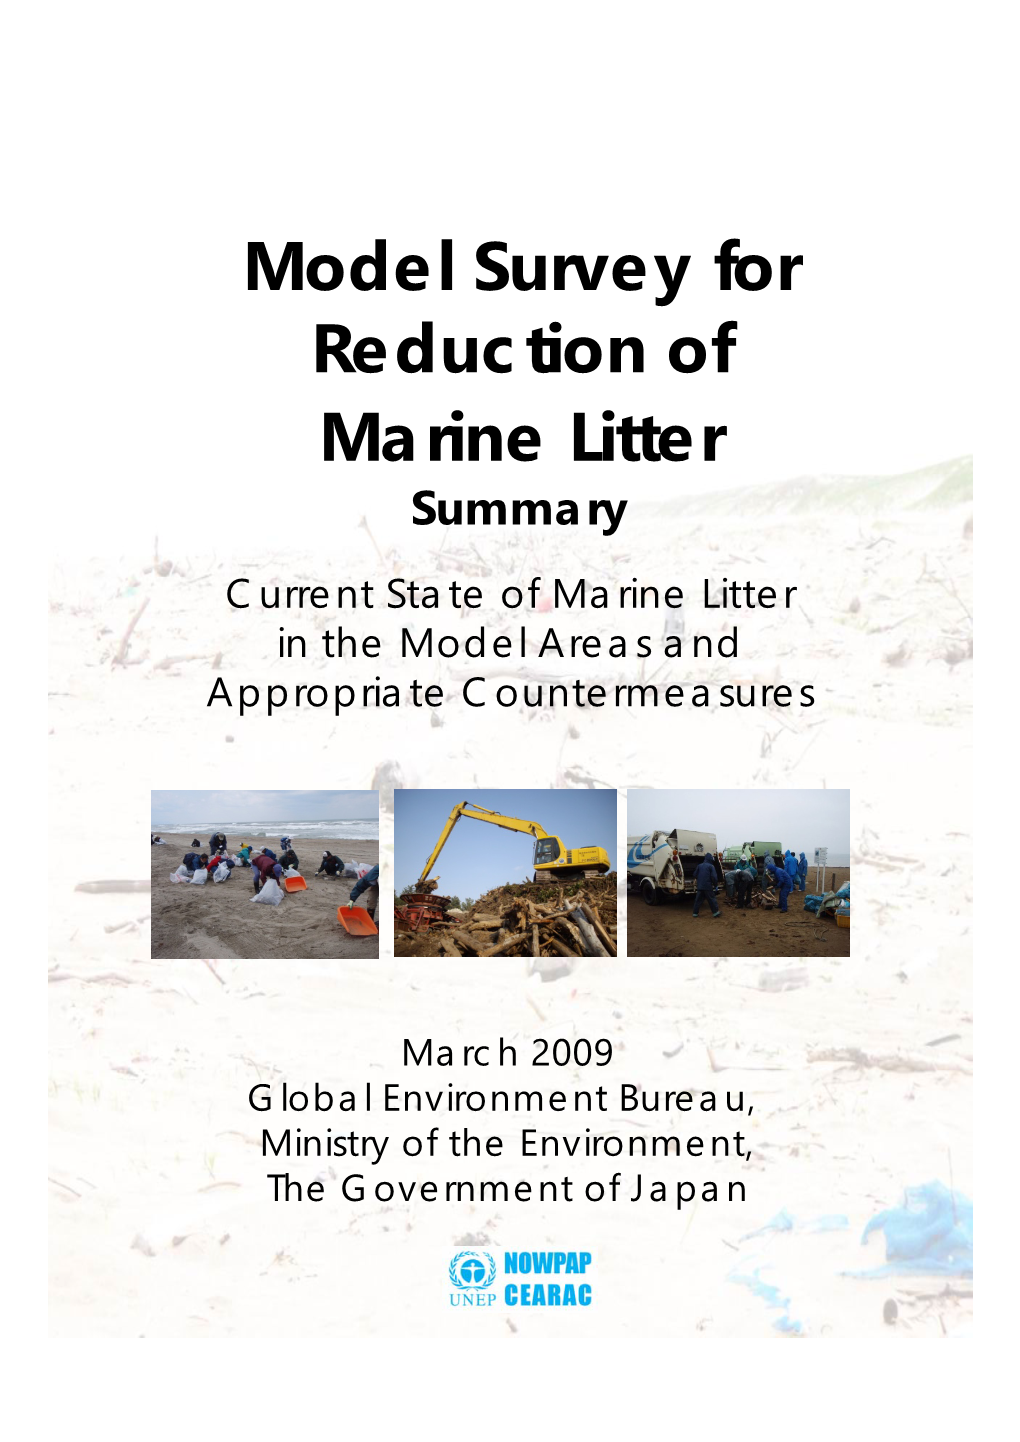 Model Survey for Reduction of Marine Litter Summary Current State of Marine Litter in the Model Areas and Appropriate Countermeasures